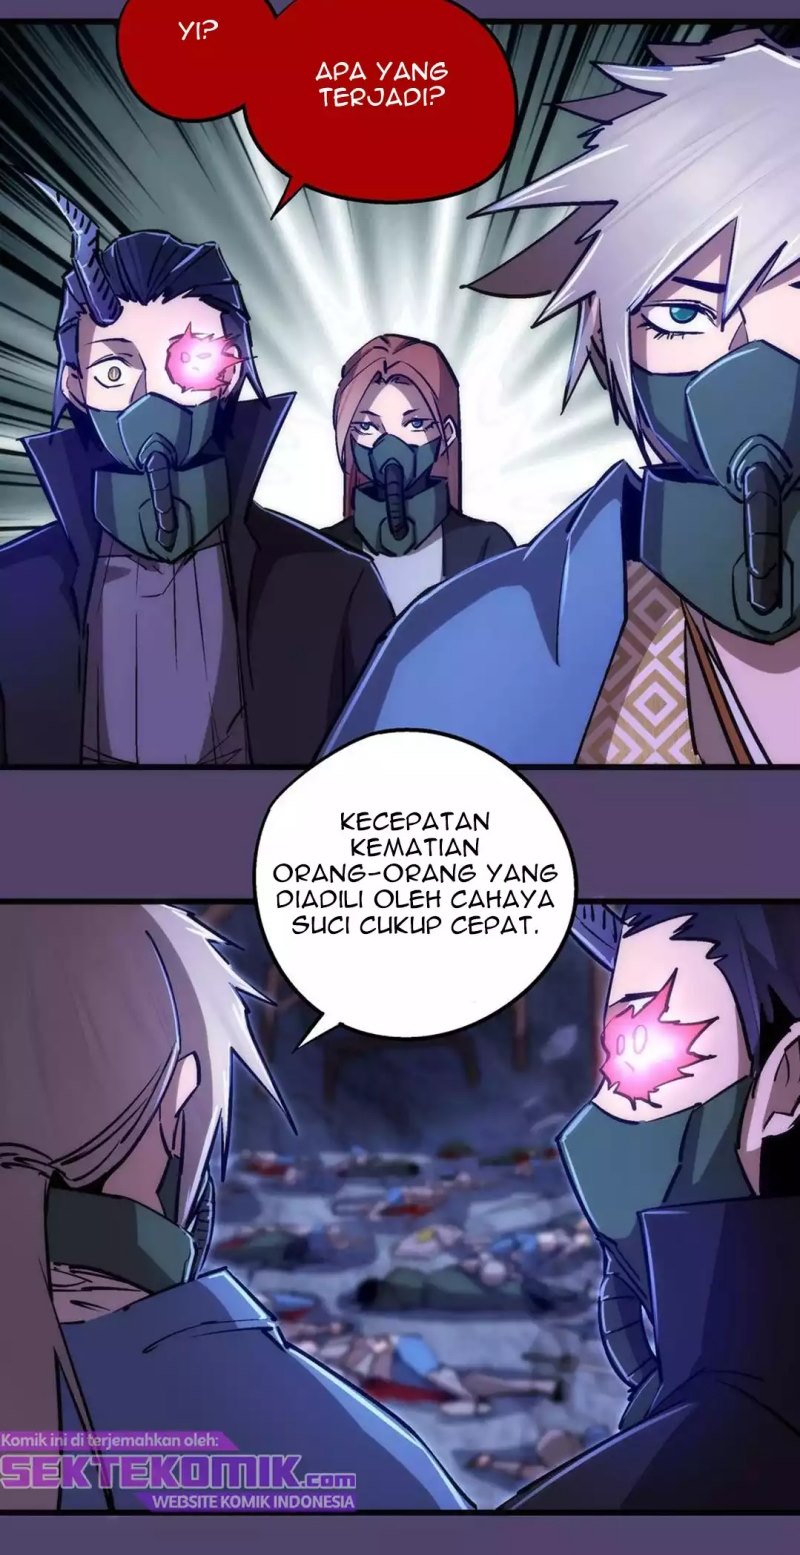 I’m Not The Overlord Chapter 88